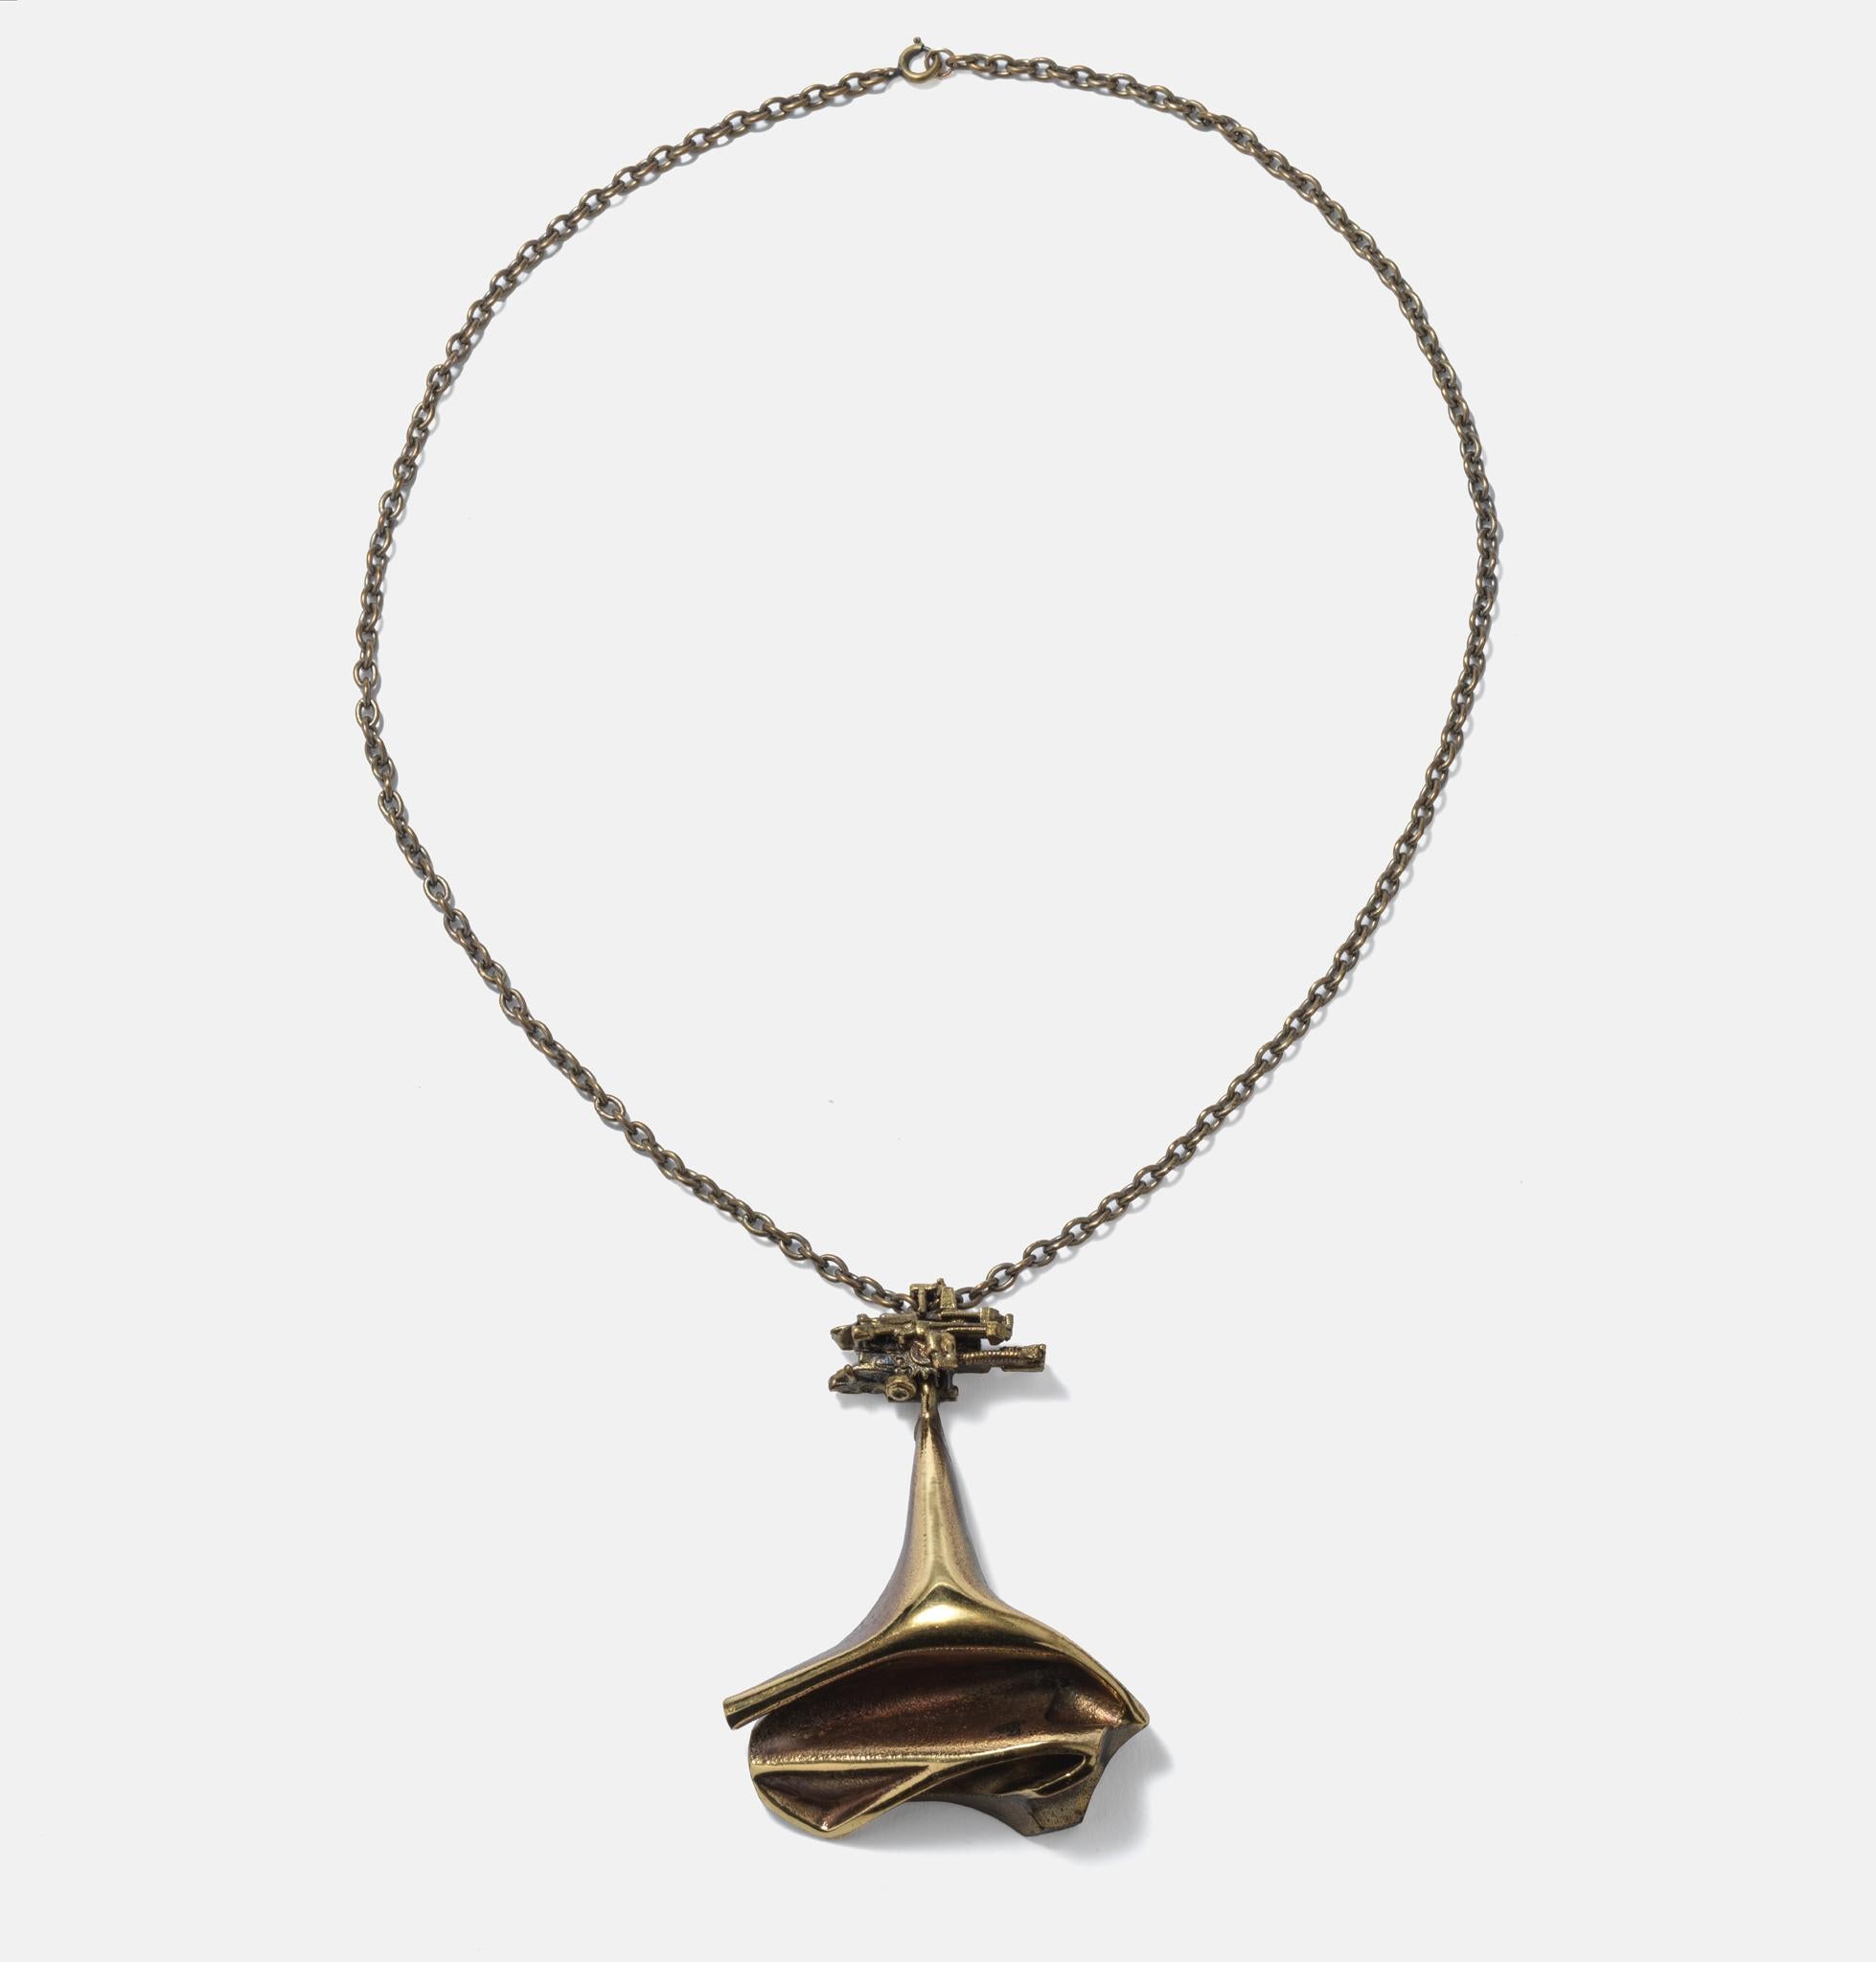 This interesting necklace titled 